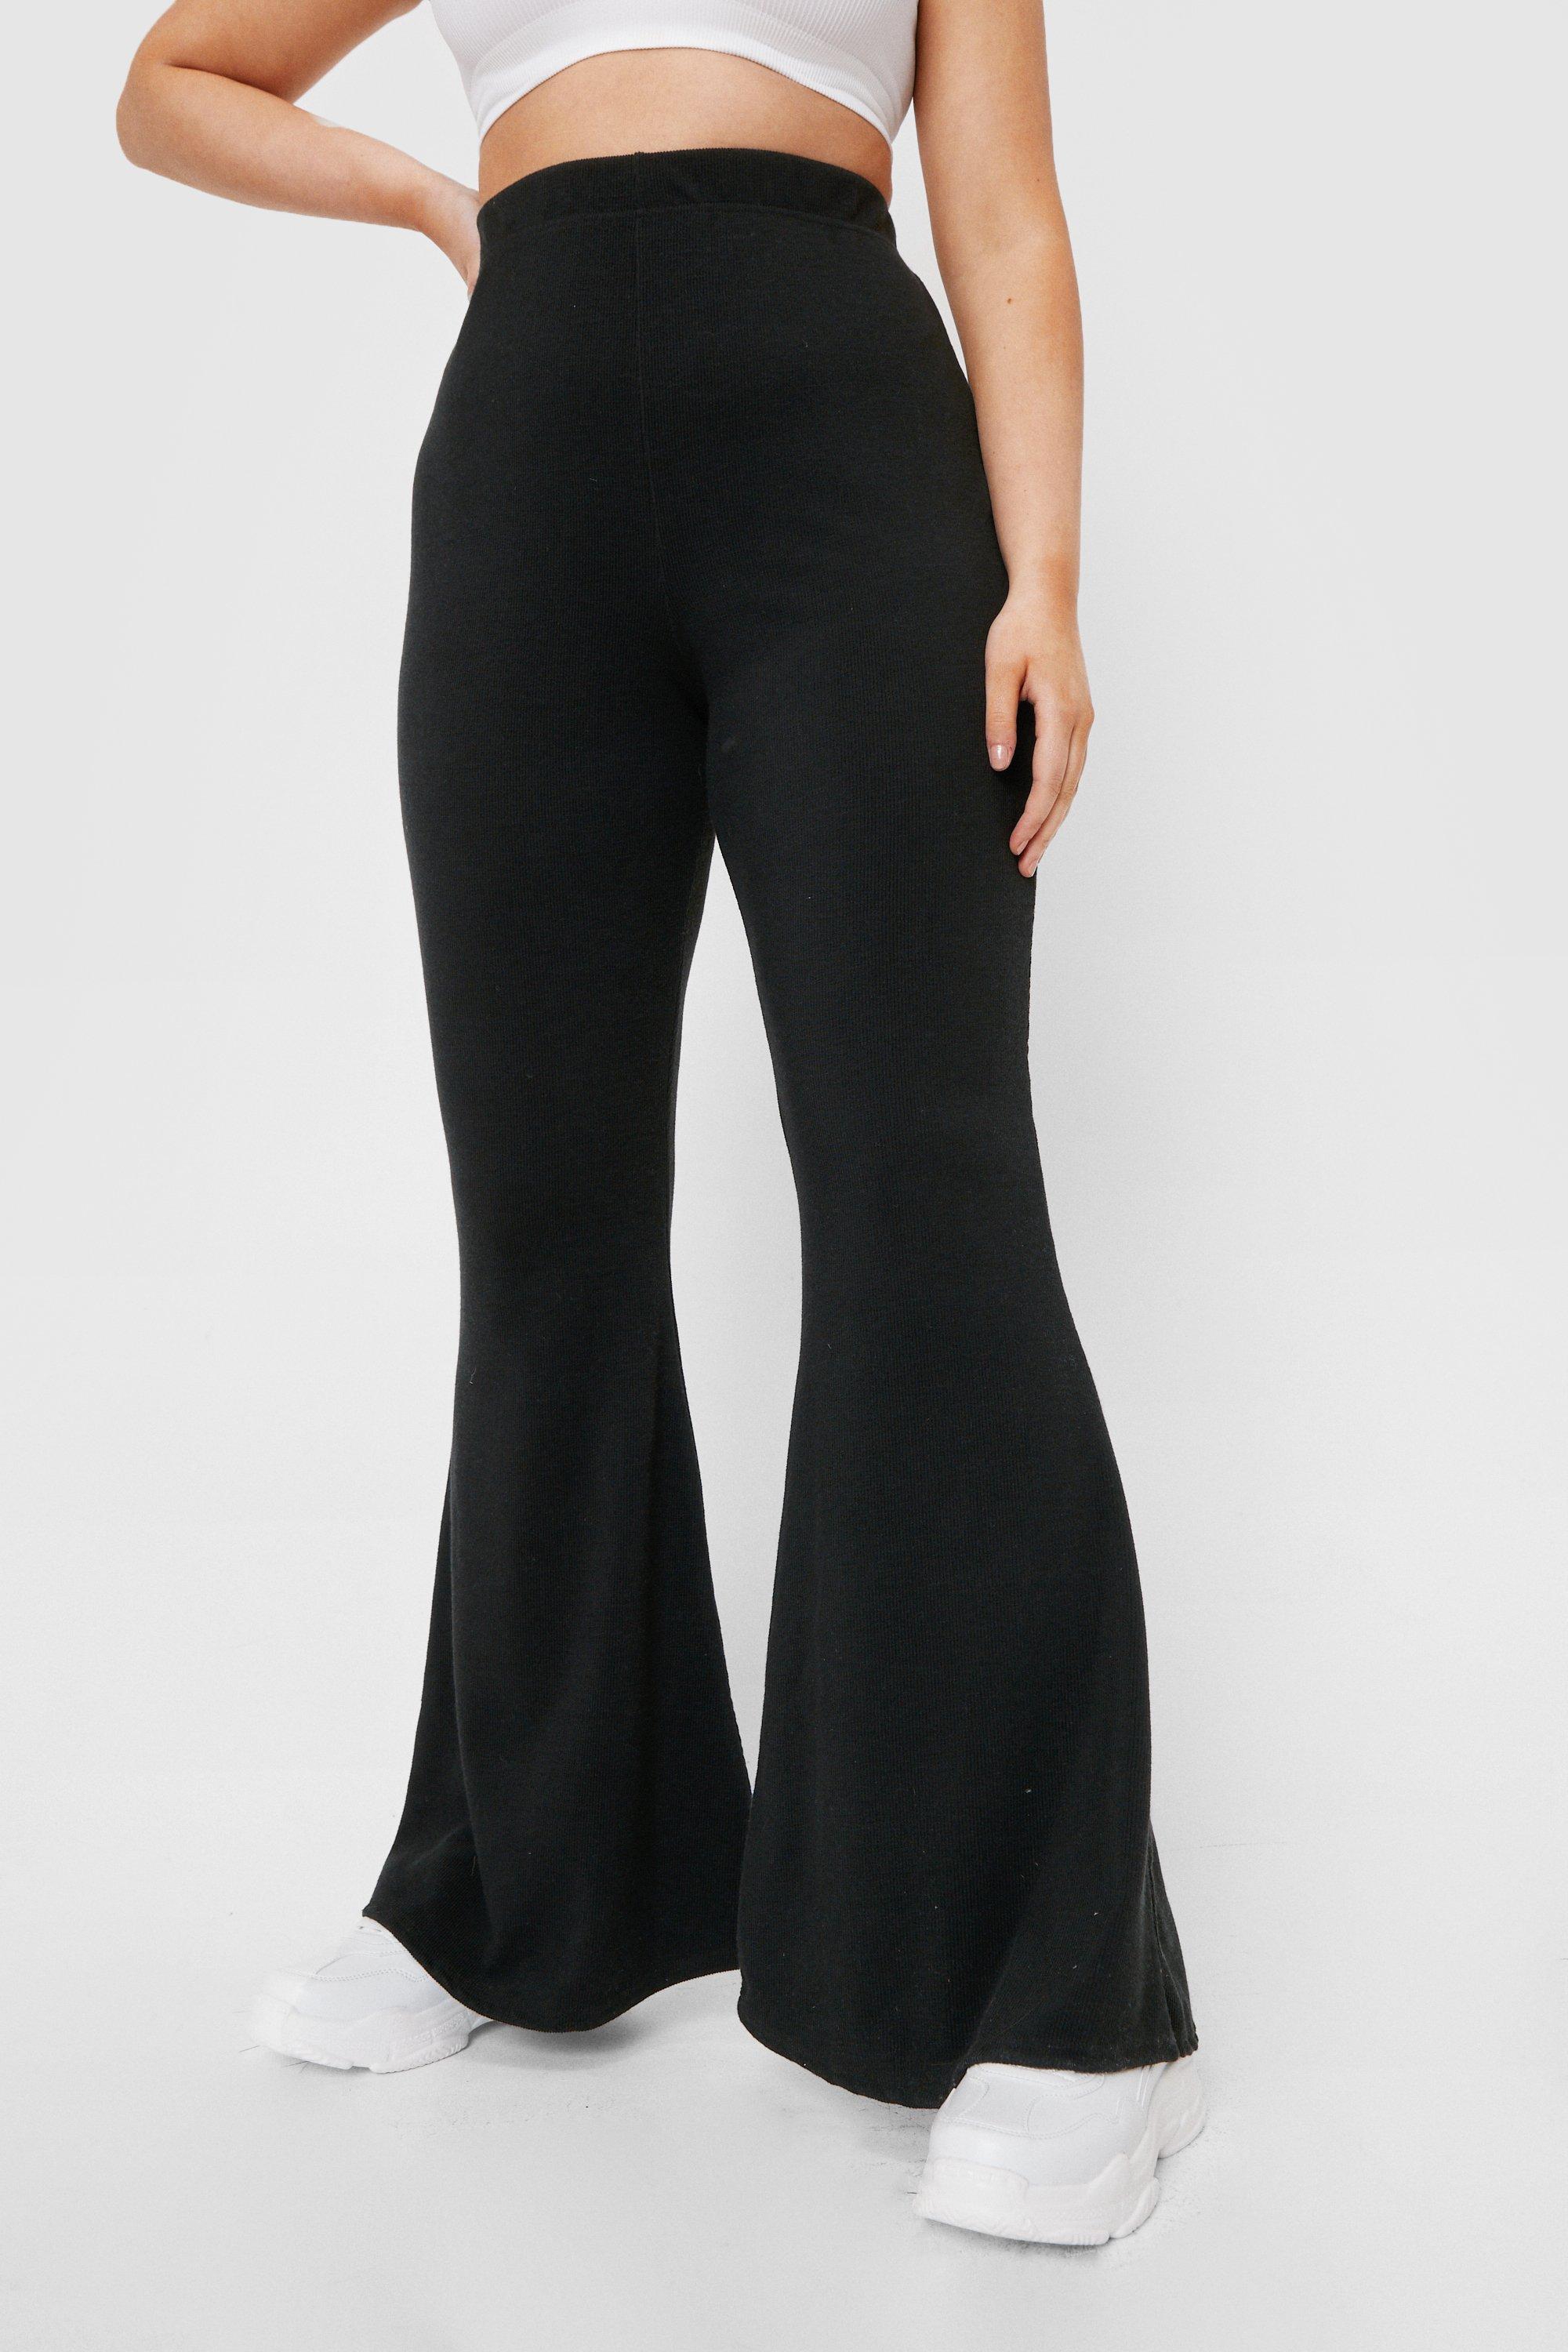 scan Delegation vacuum Plus Size High Waisted Extreme Flare Pants | Nasty Gal